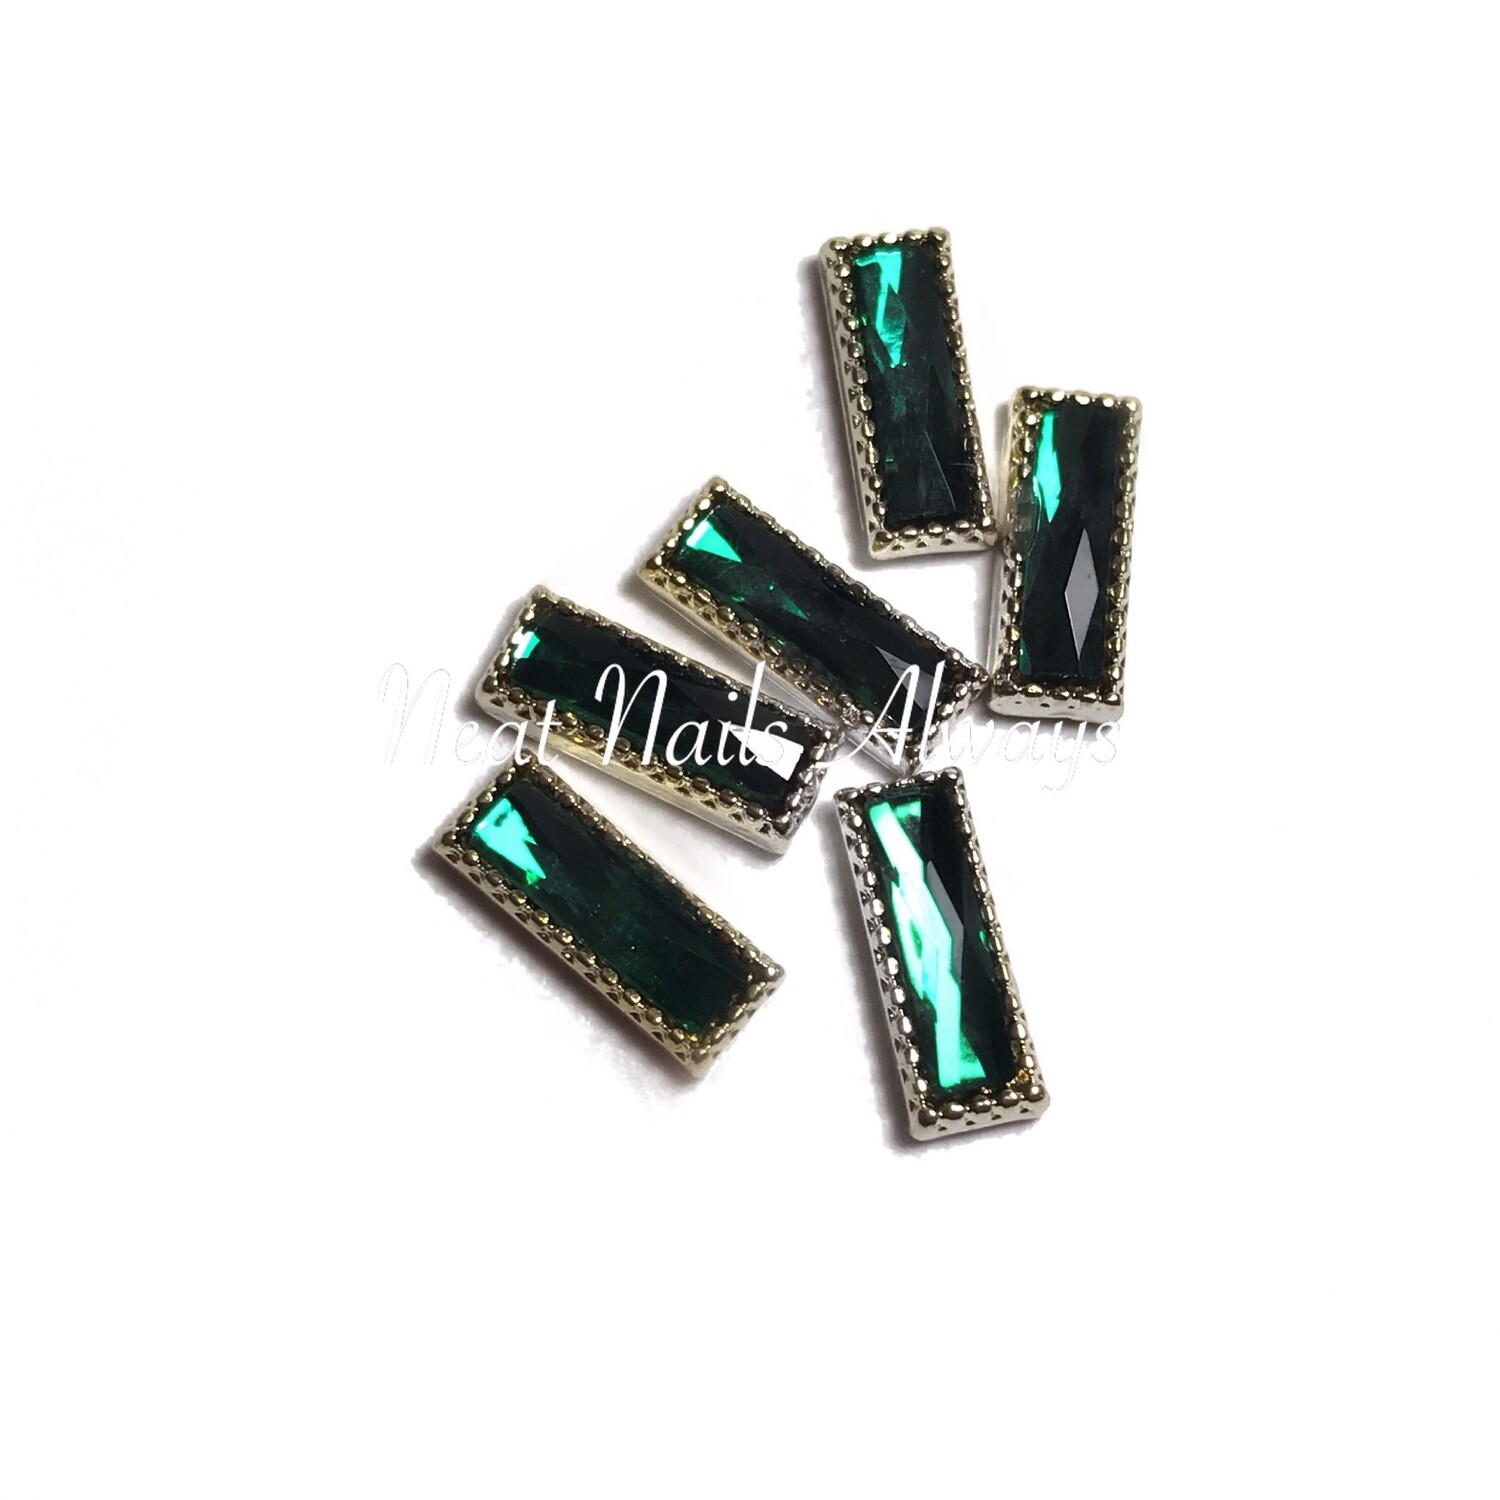 Emerald Nail Charm 4 For $6